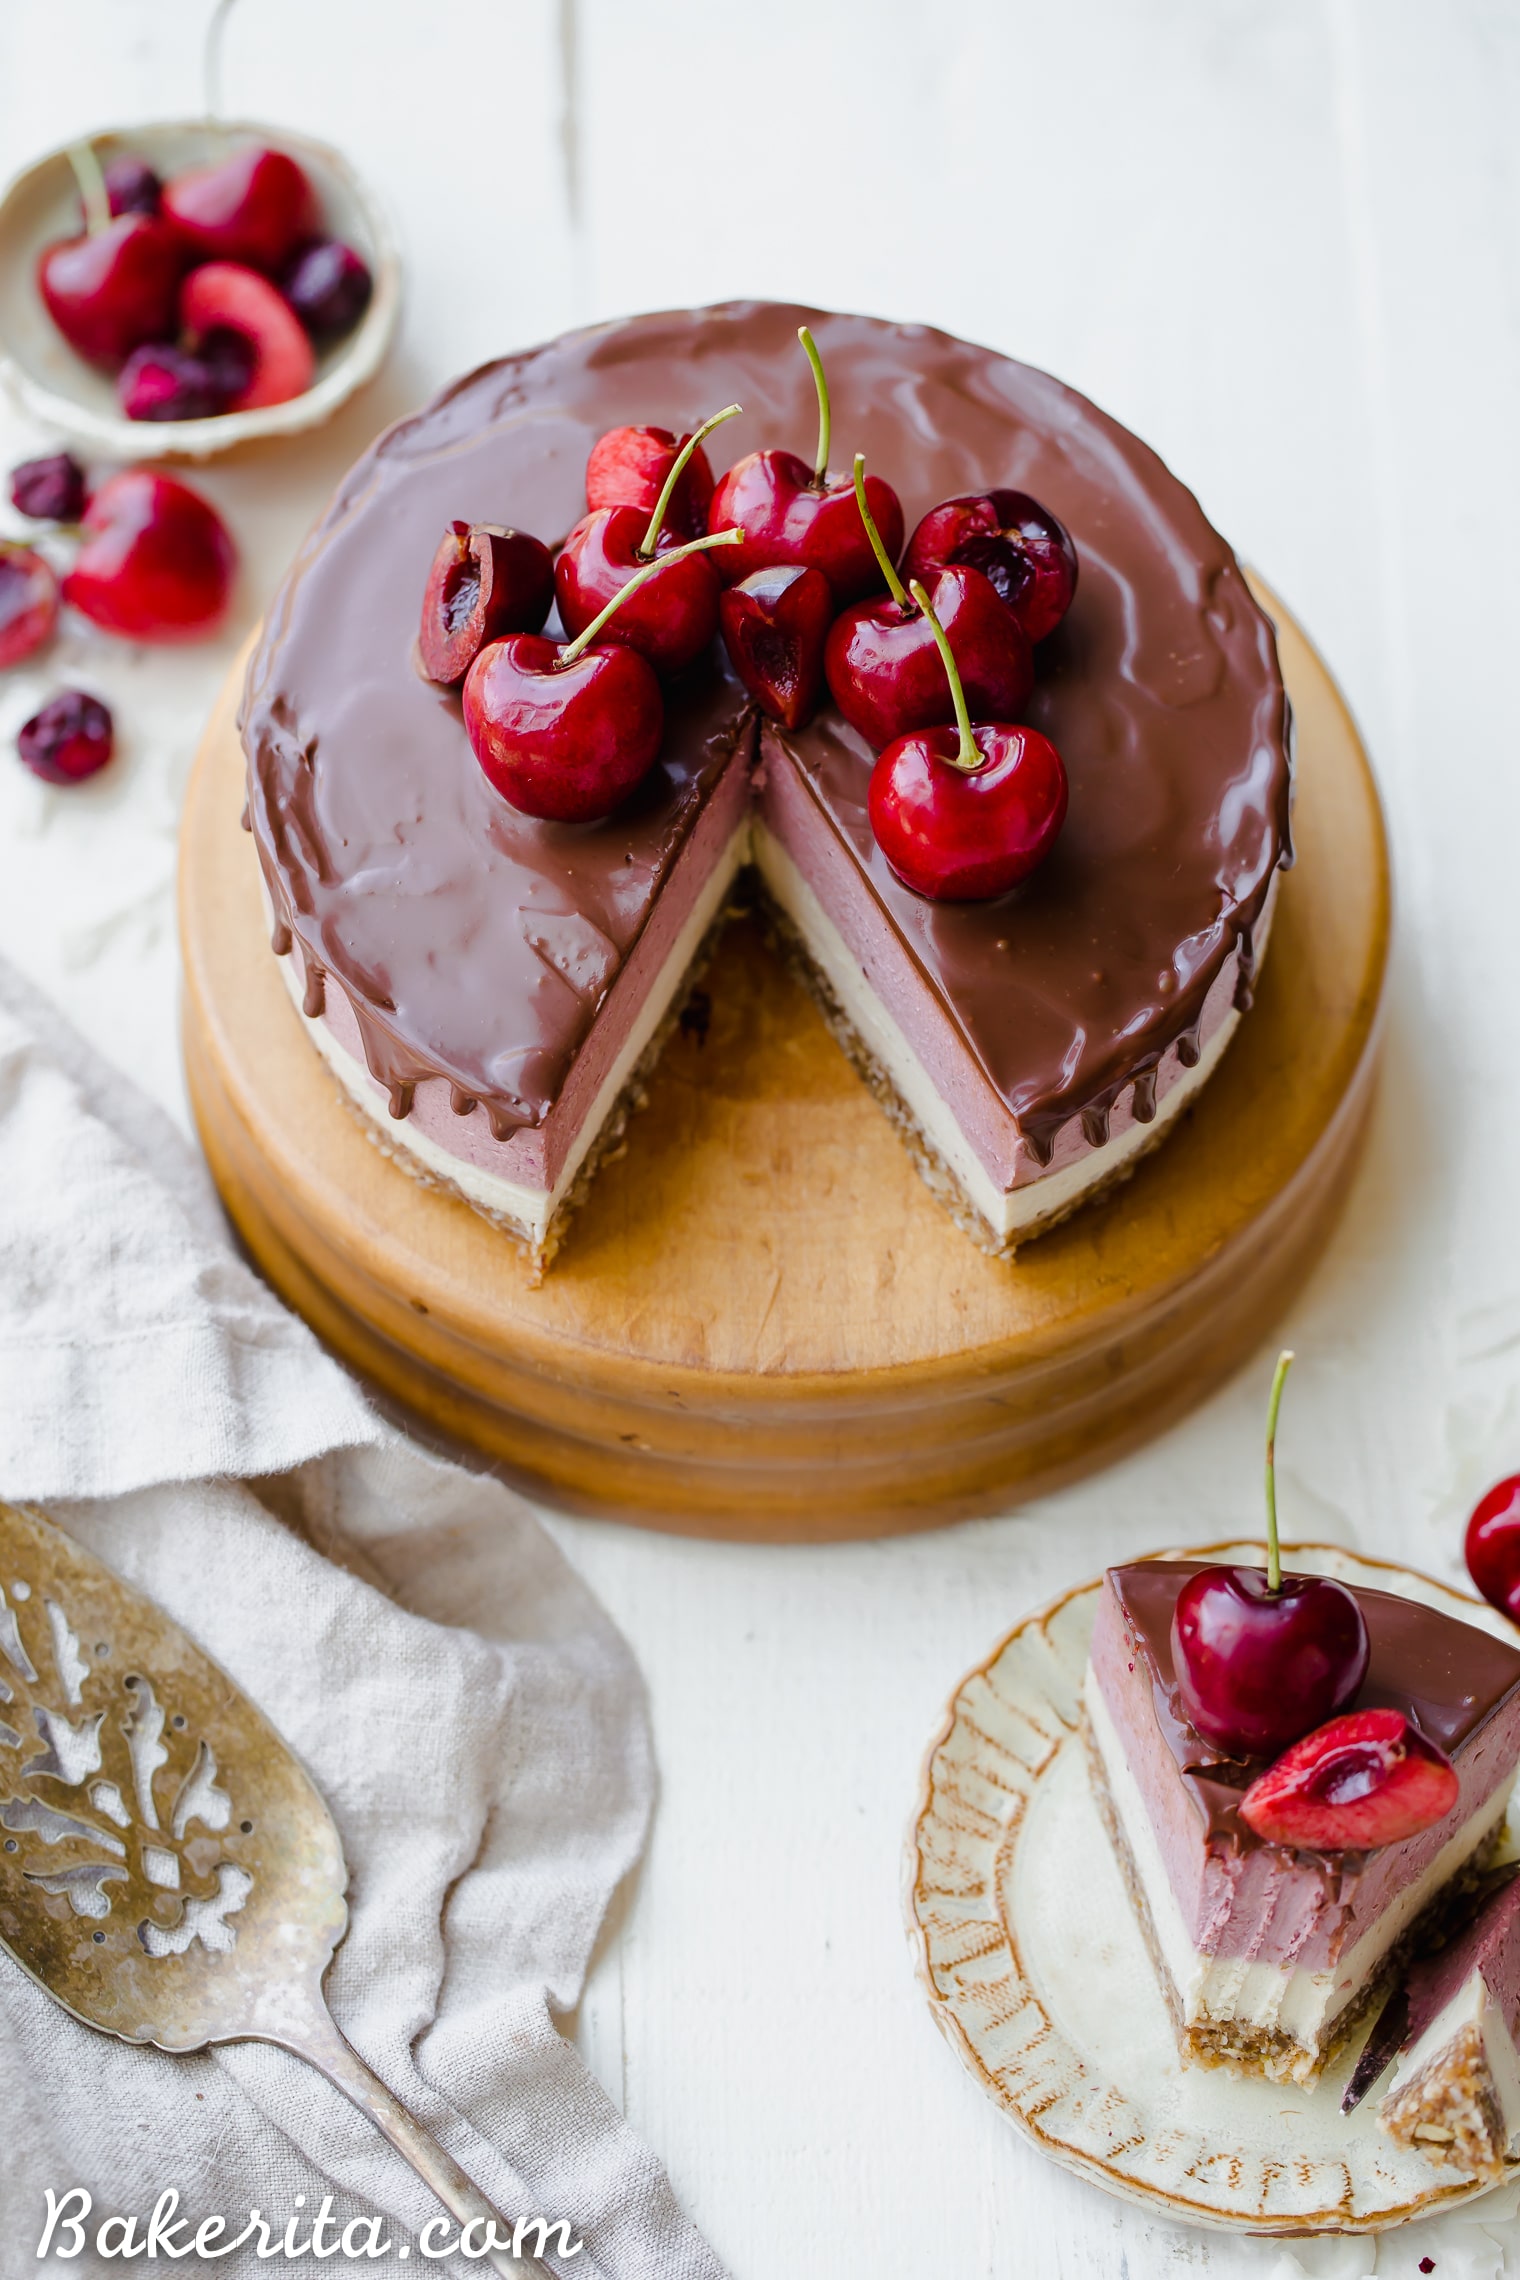 This No Bake Cherry Cheesecake has a pecan coconut crust, a layer of creamy vanilla bean cheesecake, topped by a layer of vibrant cherry cheesecake. Vegan dark chocolate ganache is spread all over the top! You'll go crazy for this gluten-free, paleo, and vegan treat.